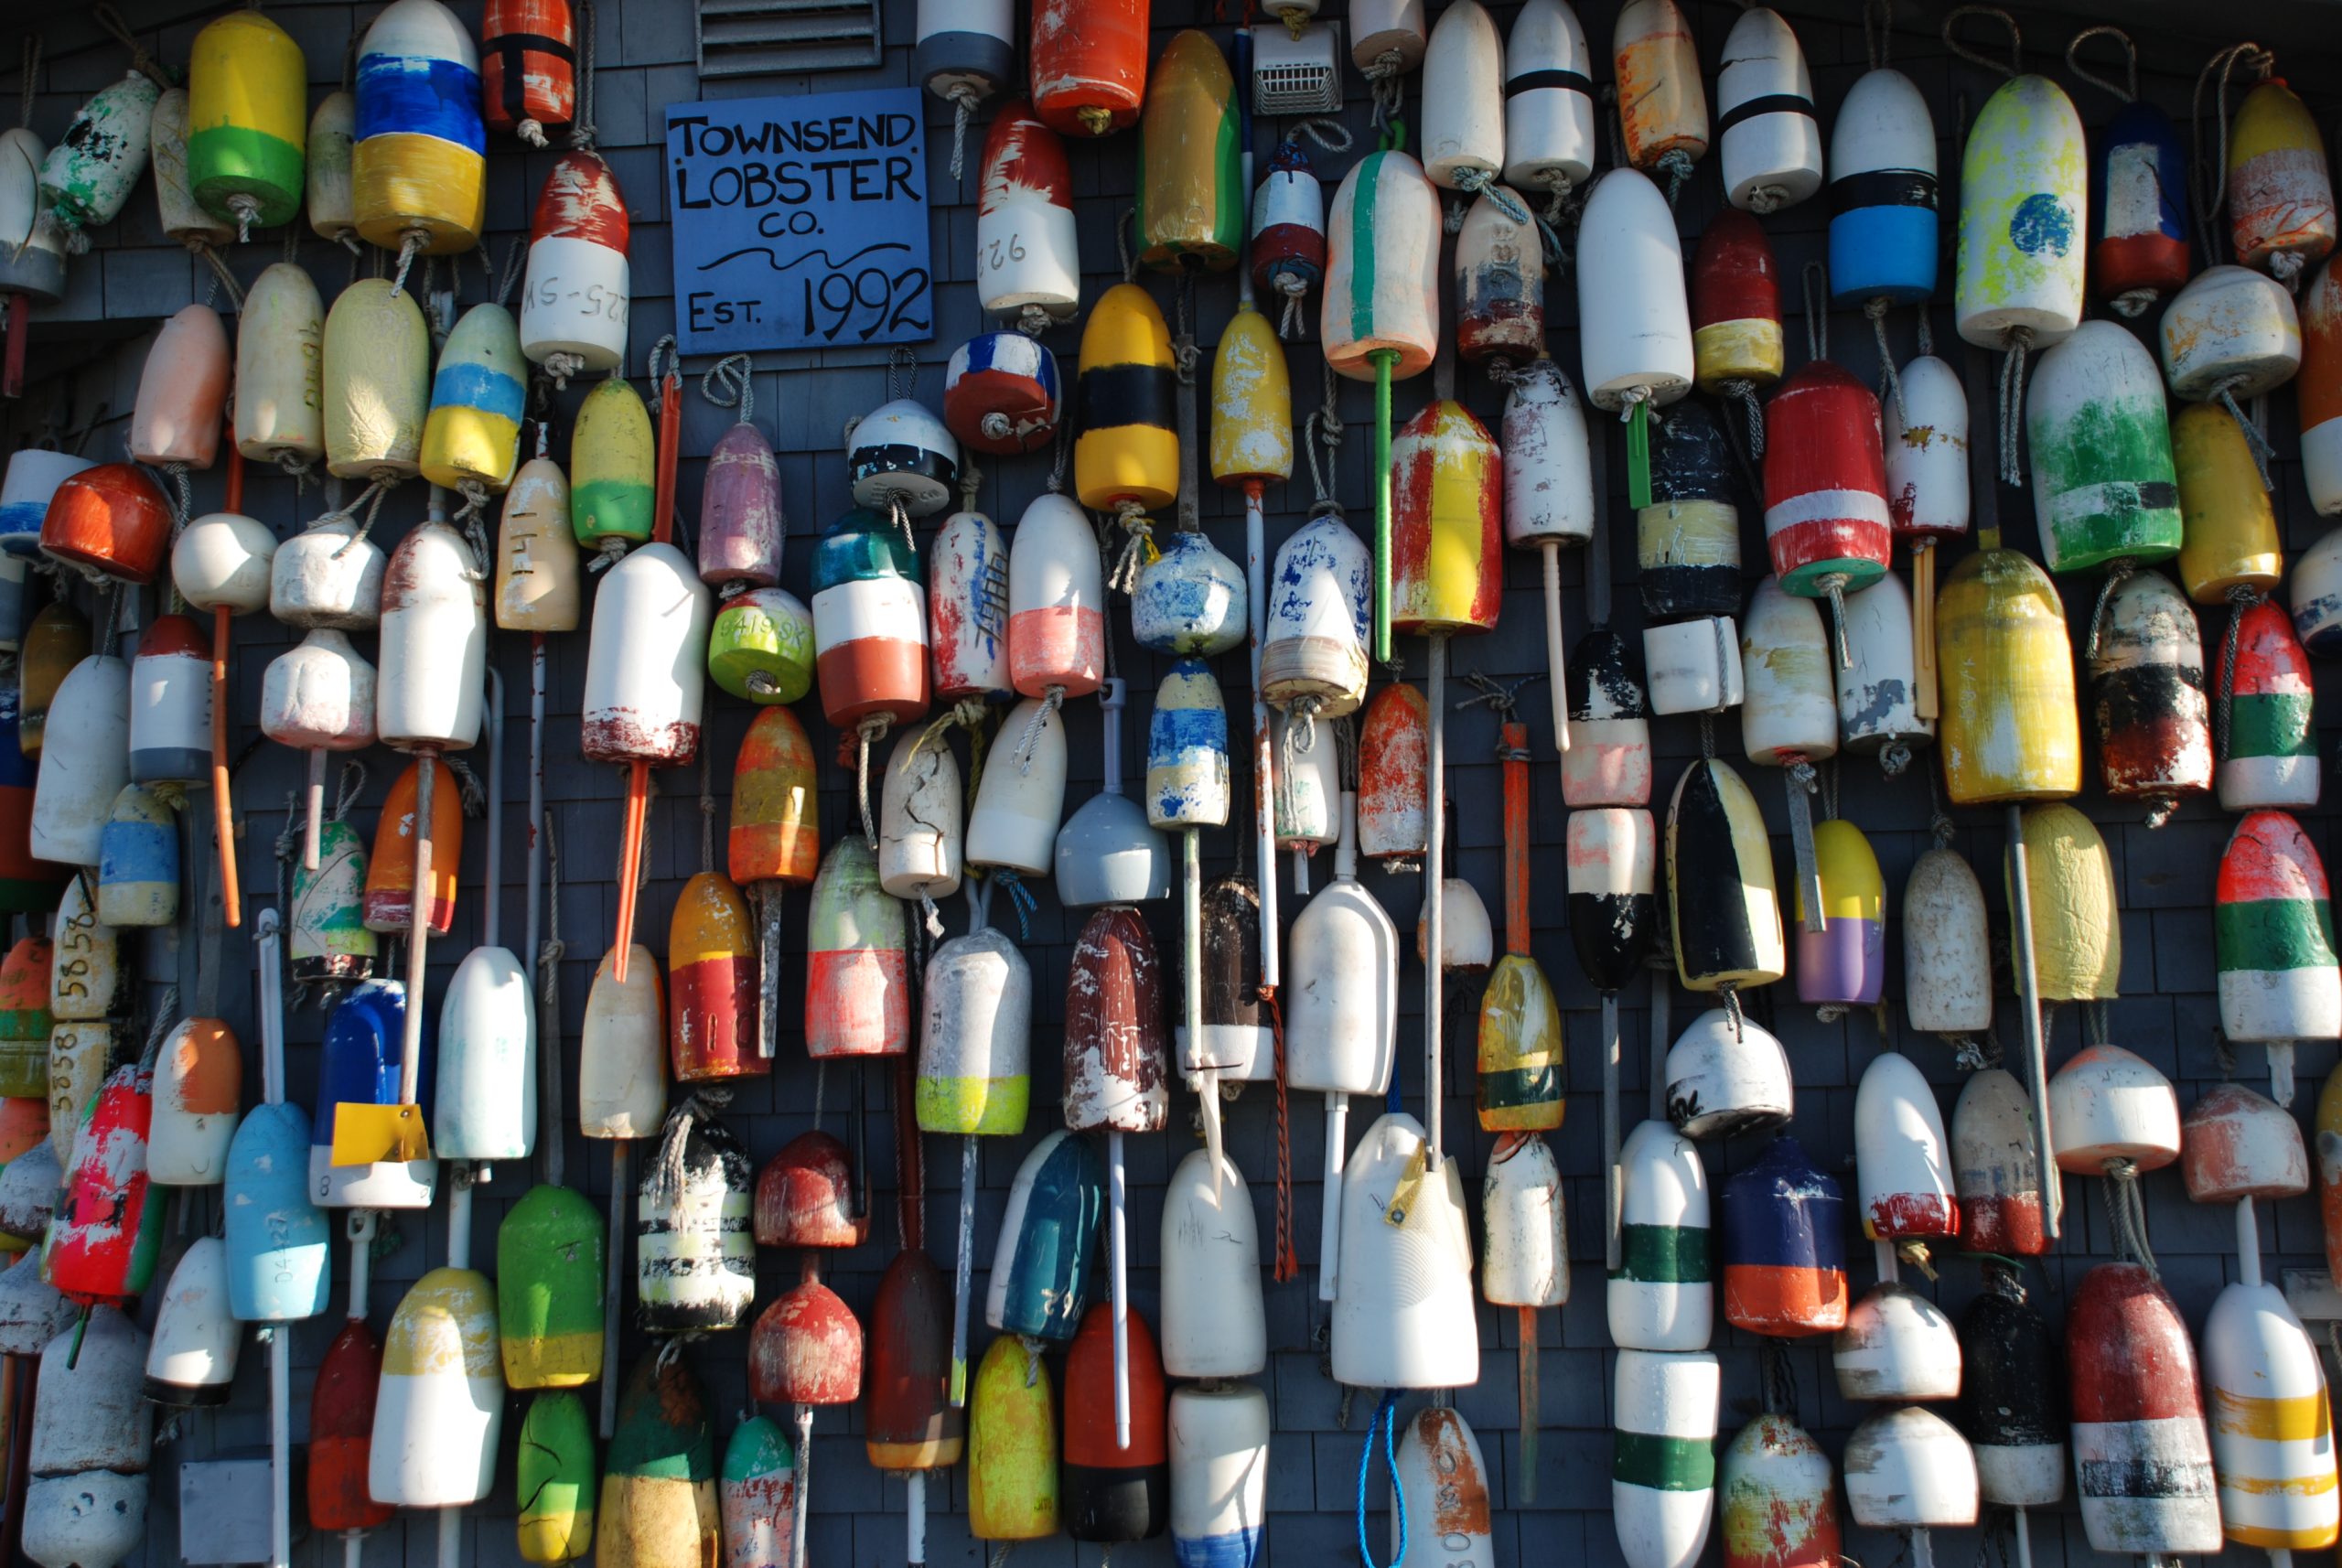 The Place To Go For Buoys (user submitted)